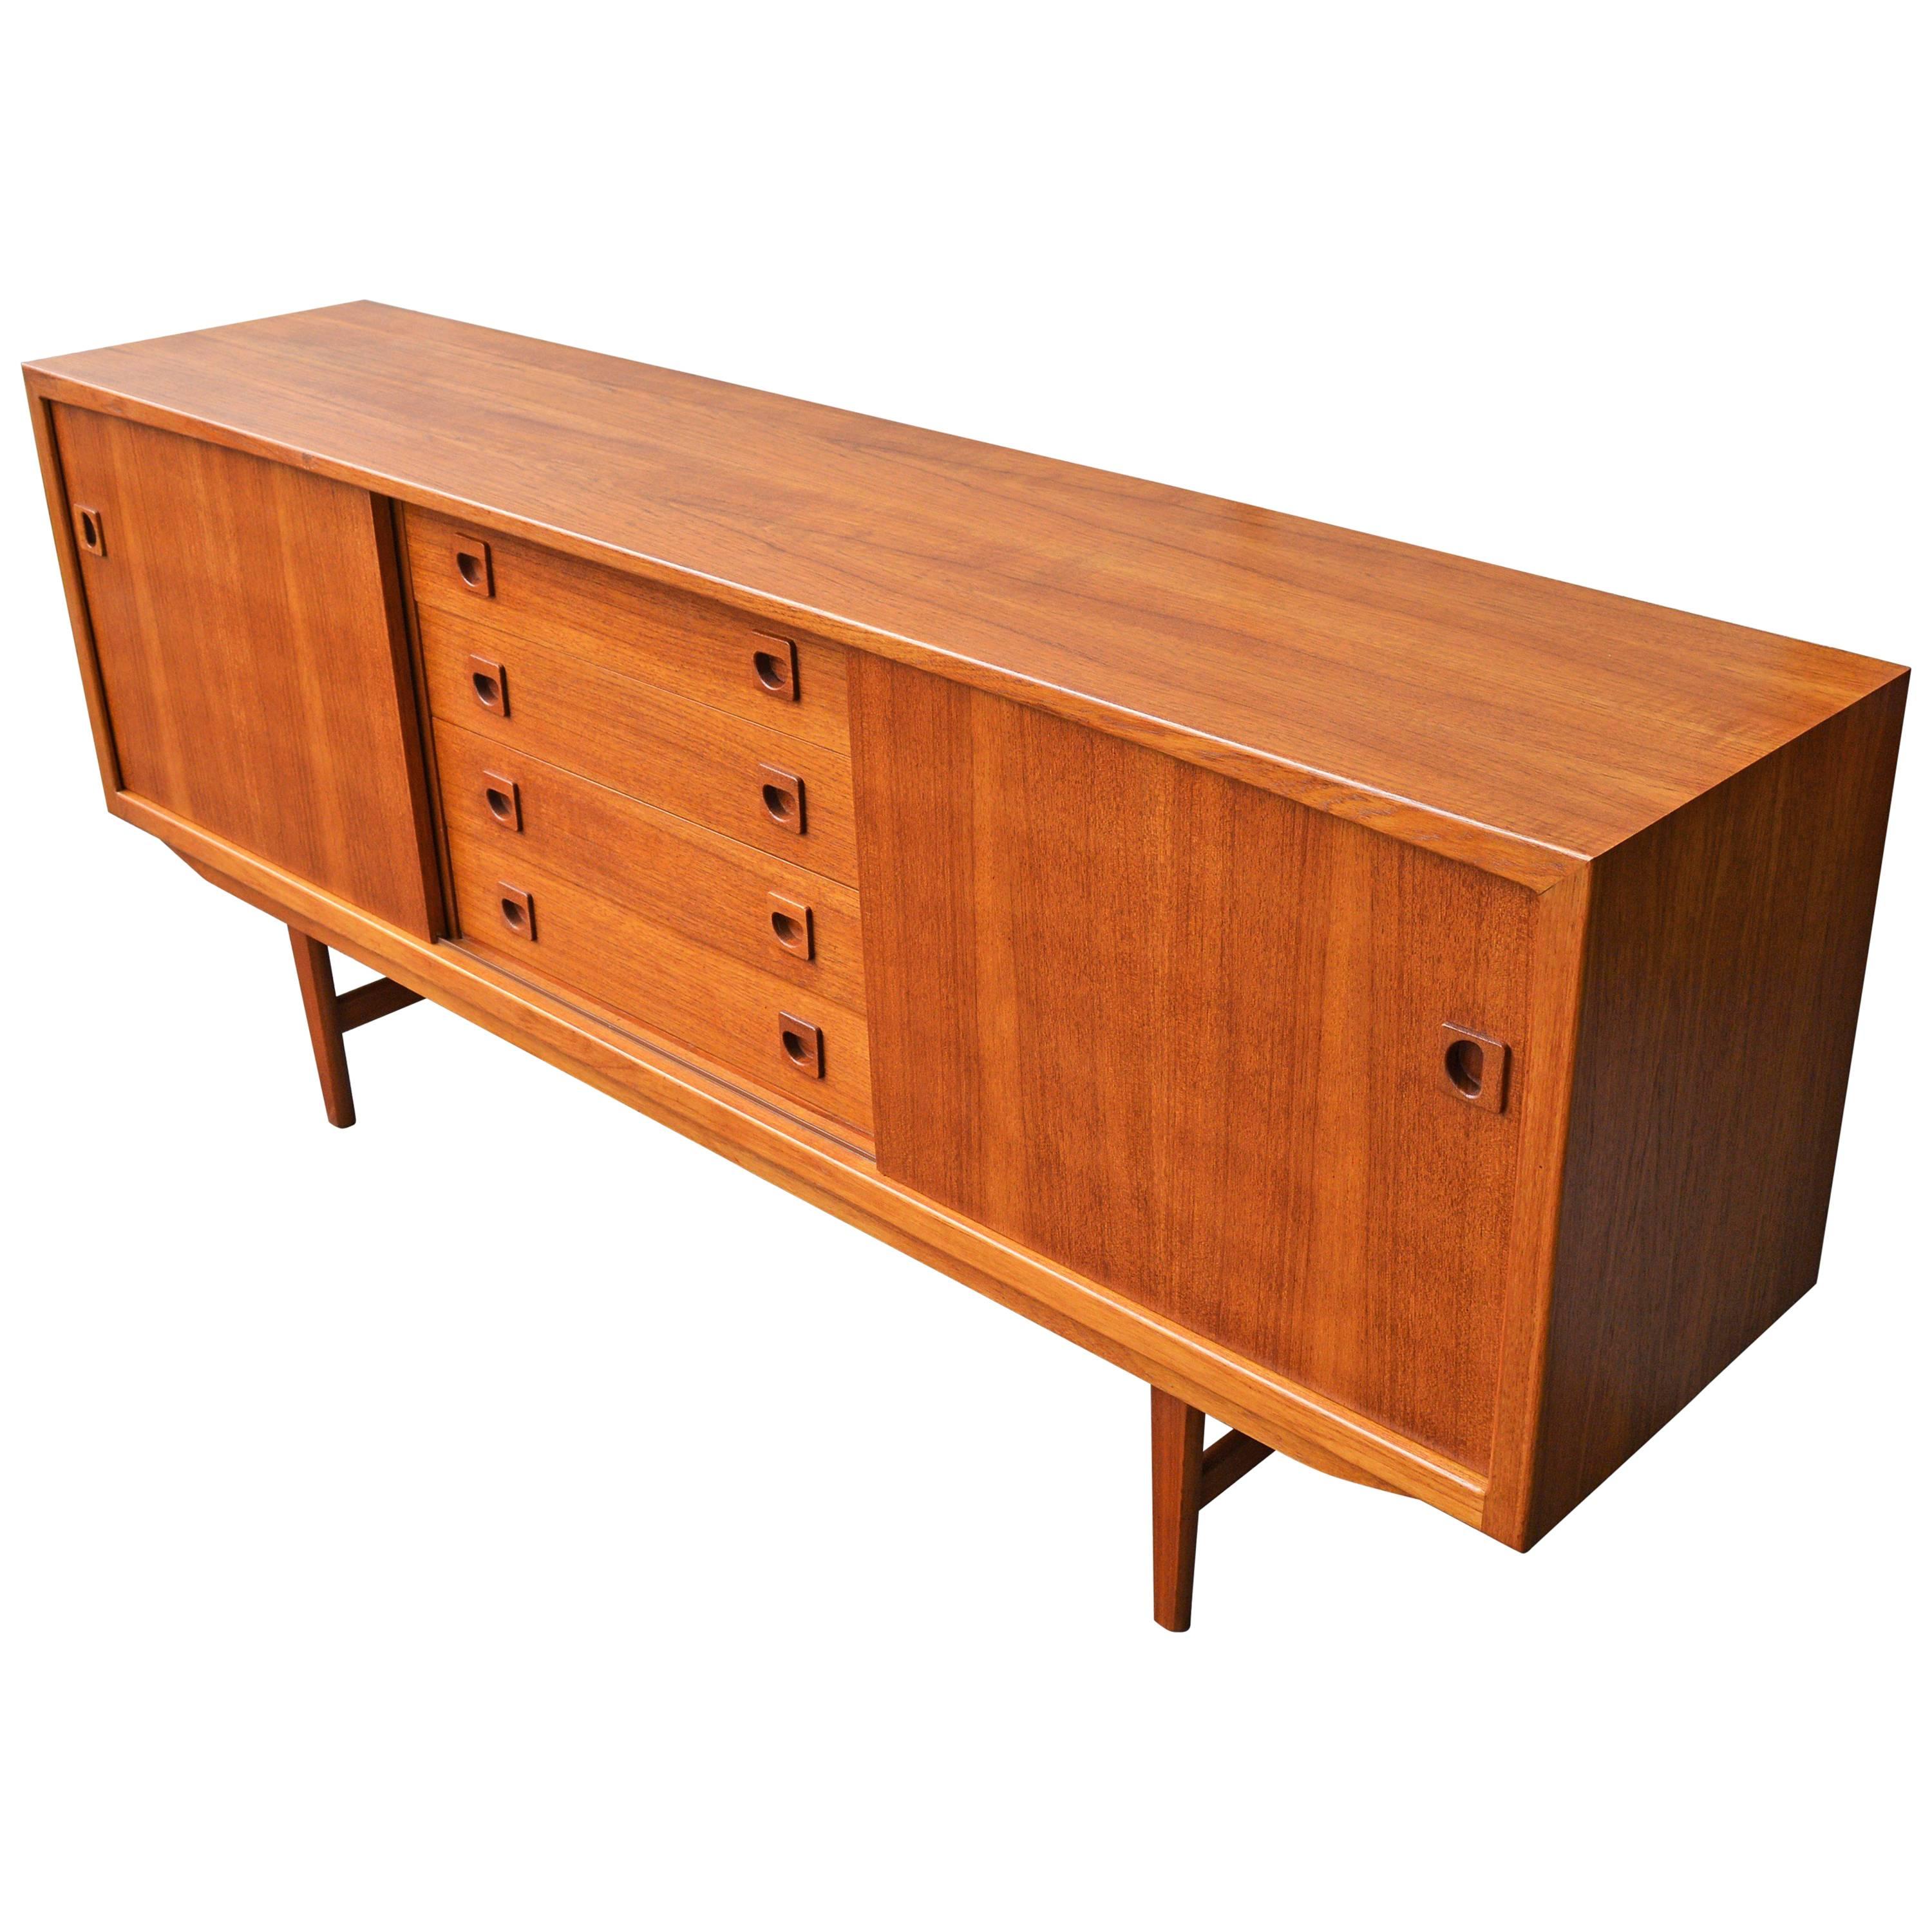 Danish Modern Teak Buffet / Credenza with Centre Drawers and Sword Blade Legs